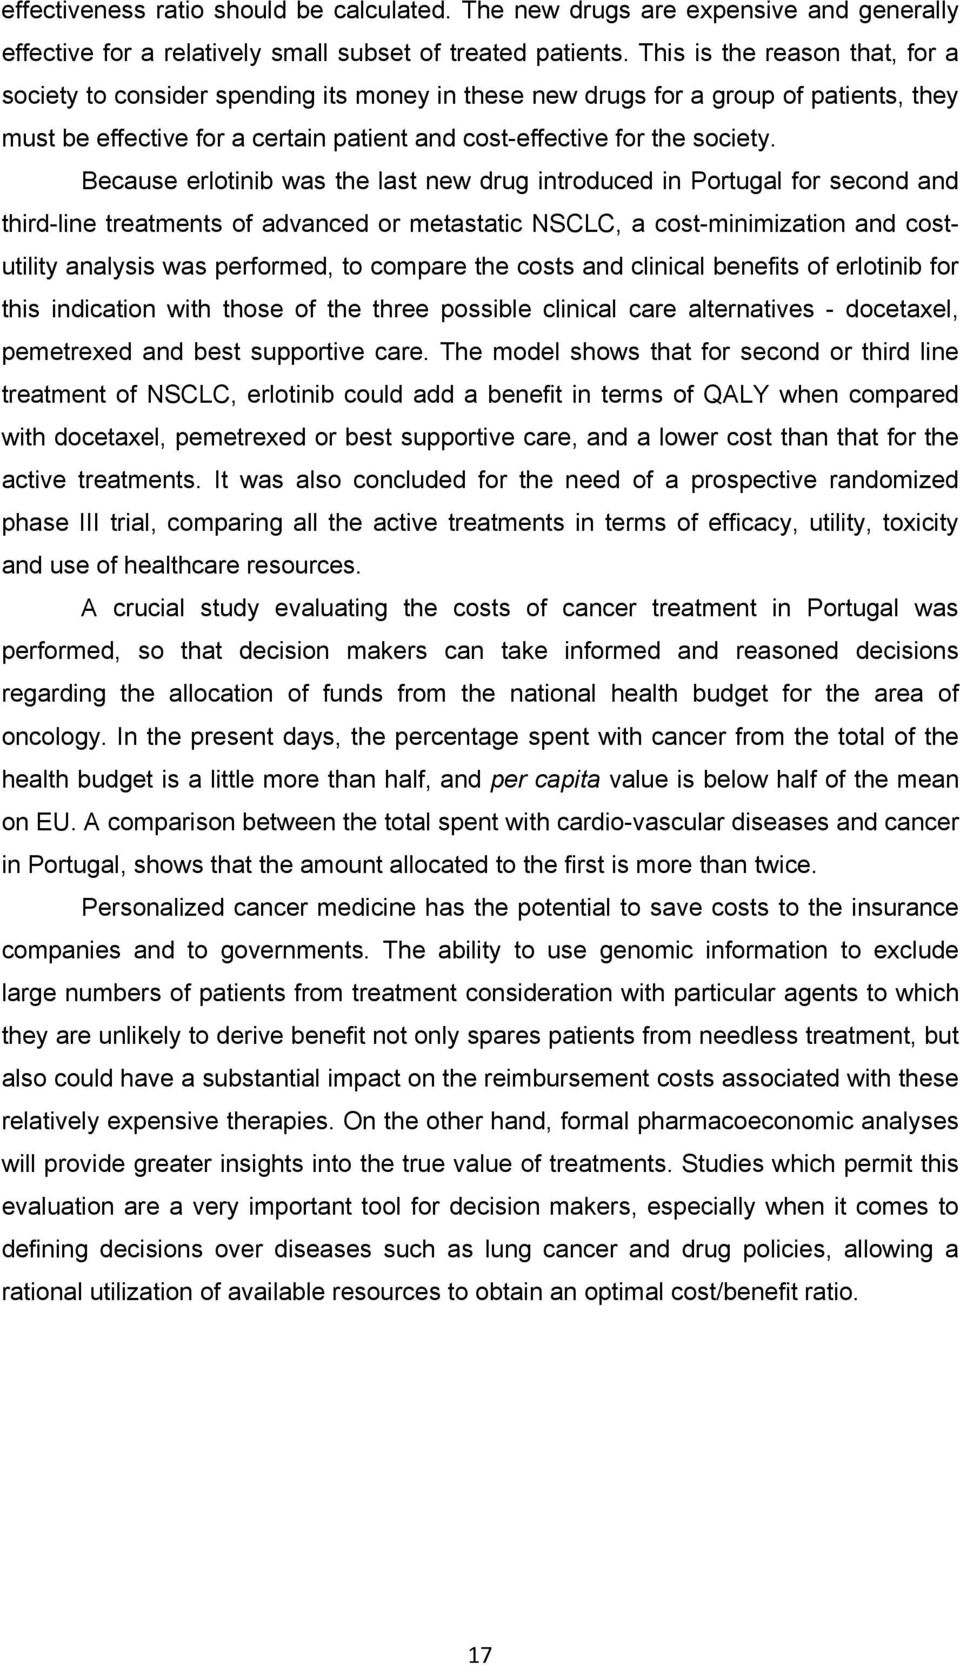 Because erlotinib was the last new drug introduced in Portugal for second and third-line treatments of advanced or metastatic NSCLC, a cost-minimization and costutility analysis was performed, to